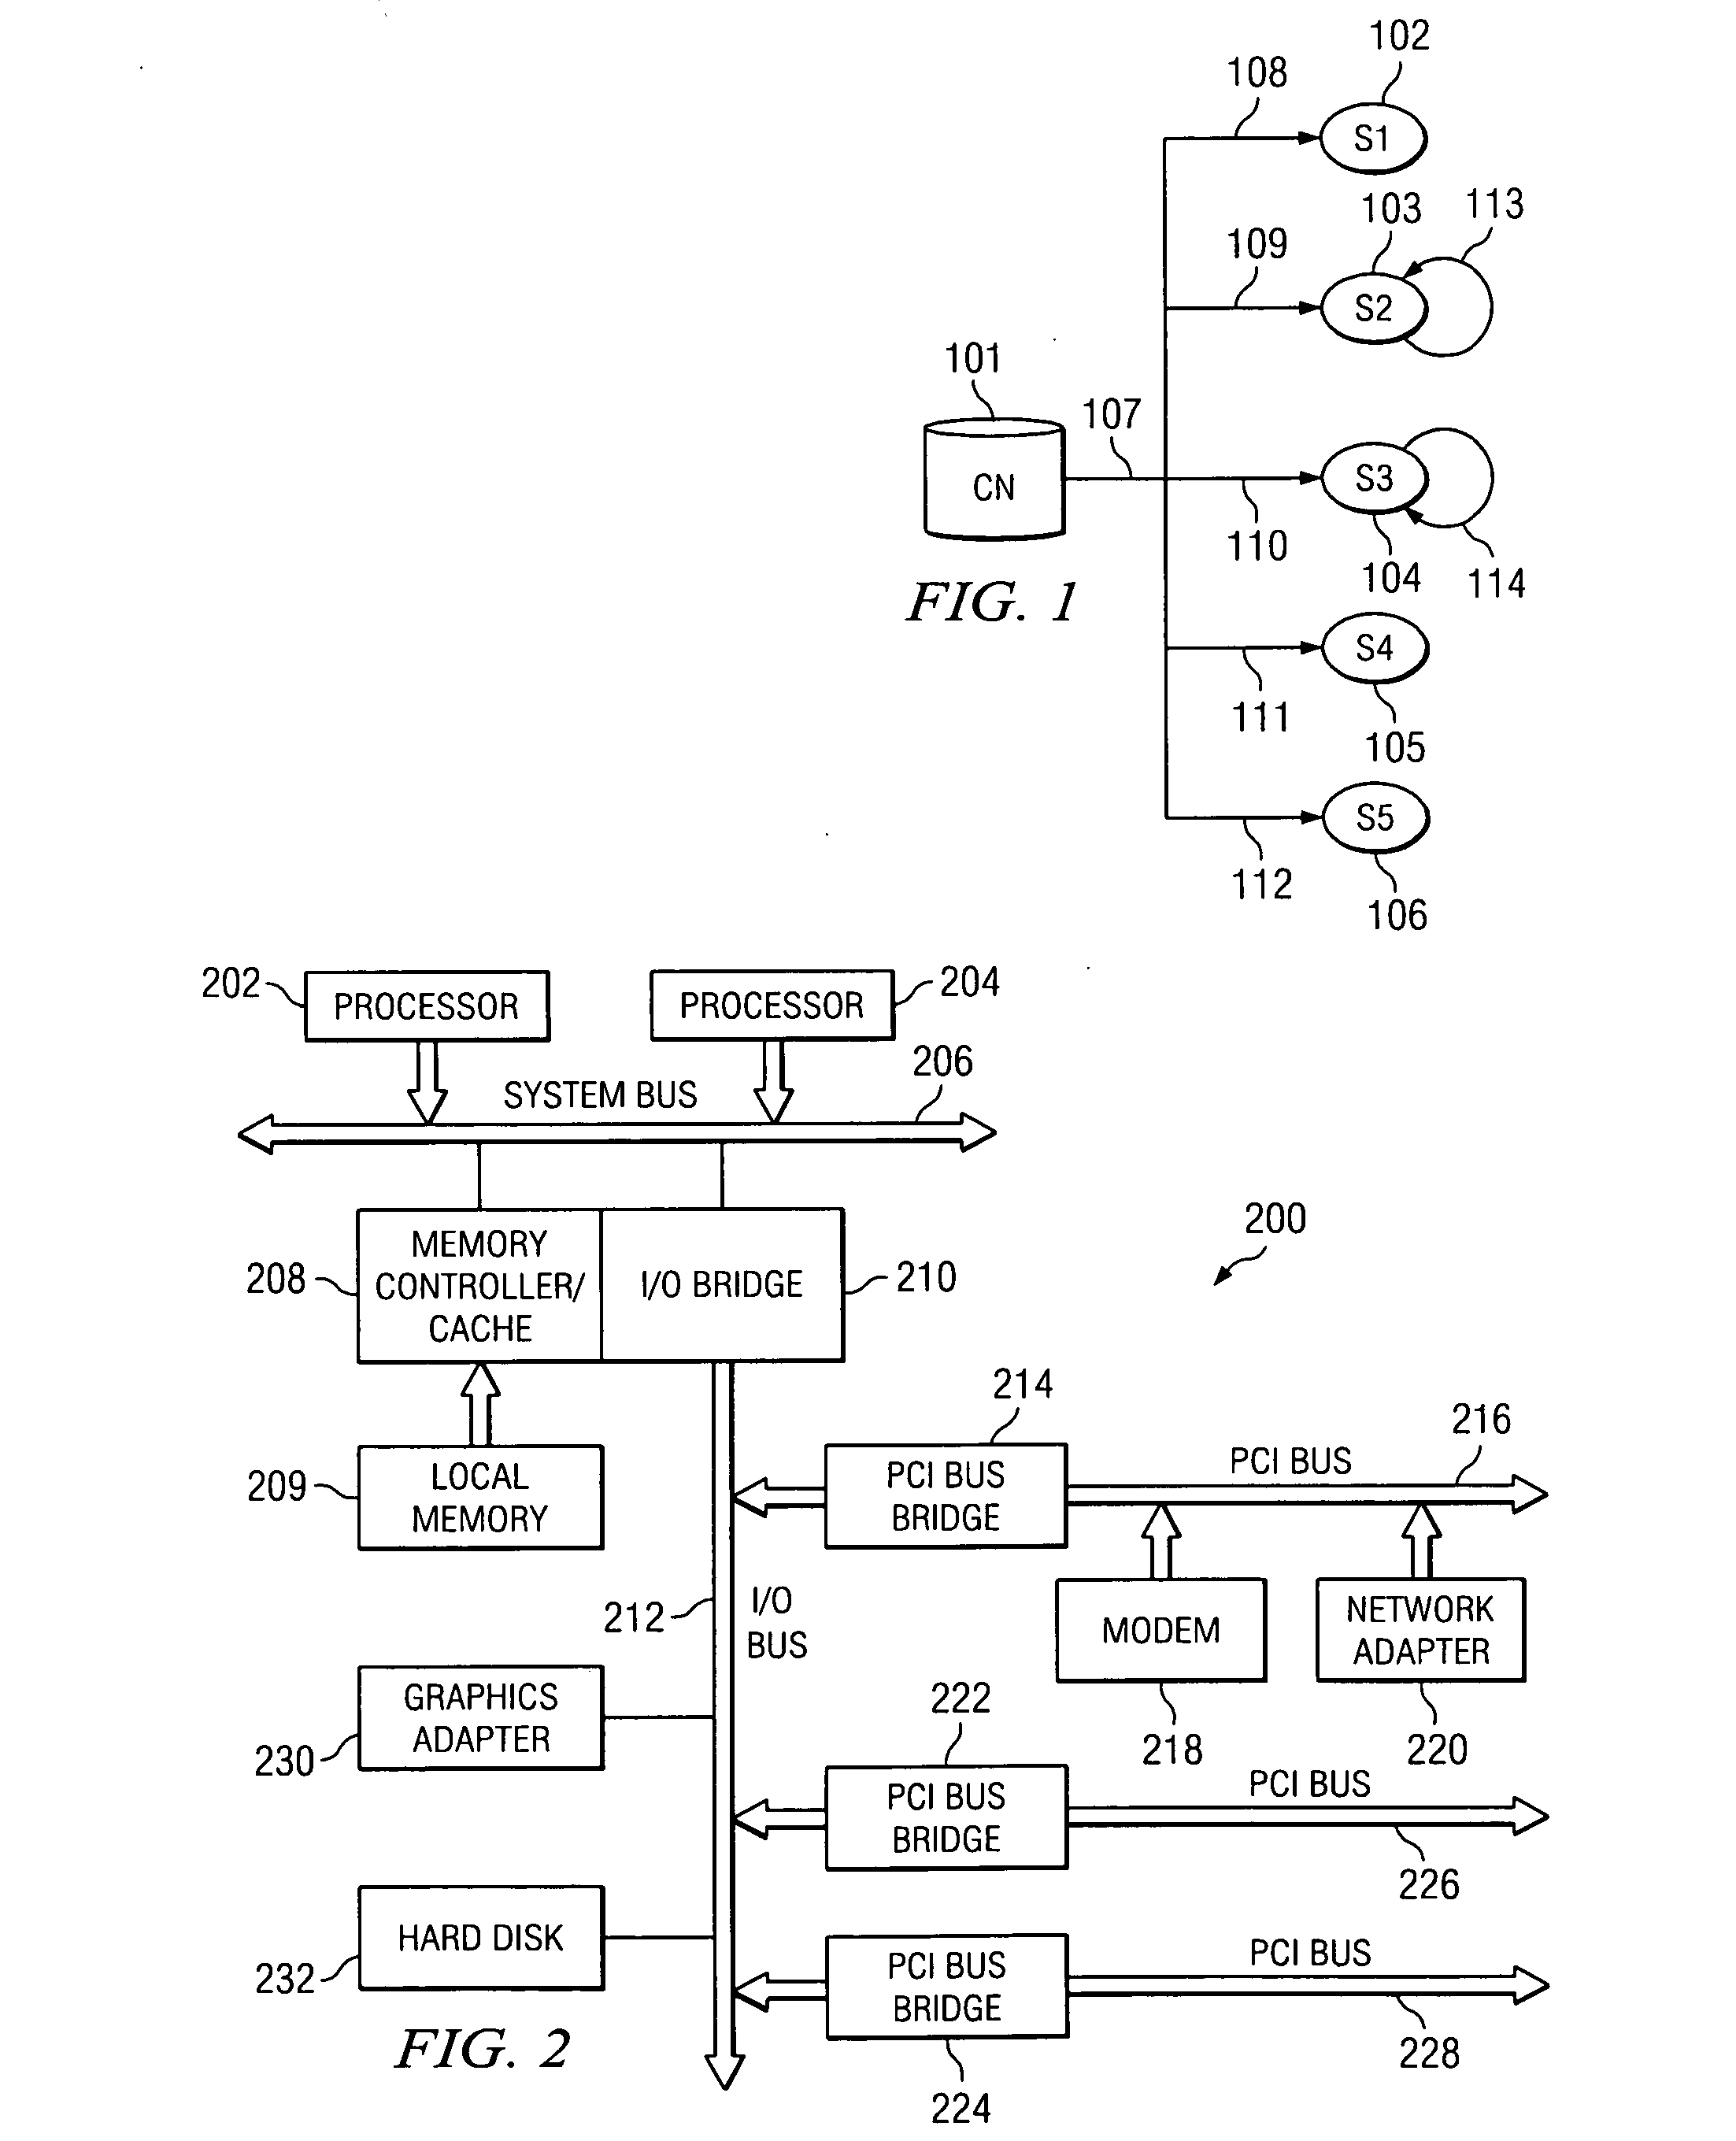 Method for adaptively modifying the observed collective behavior of individual sensor nodes based on broadcasting of parameters